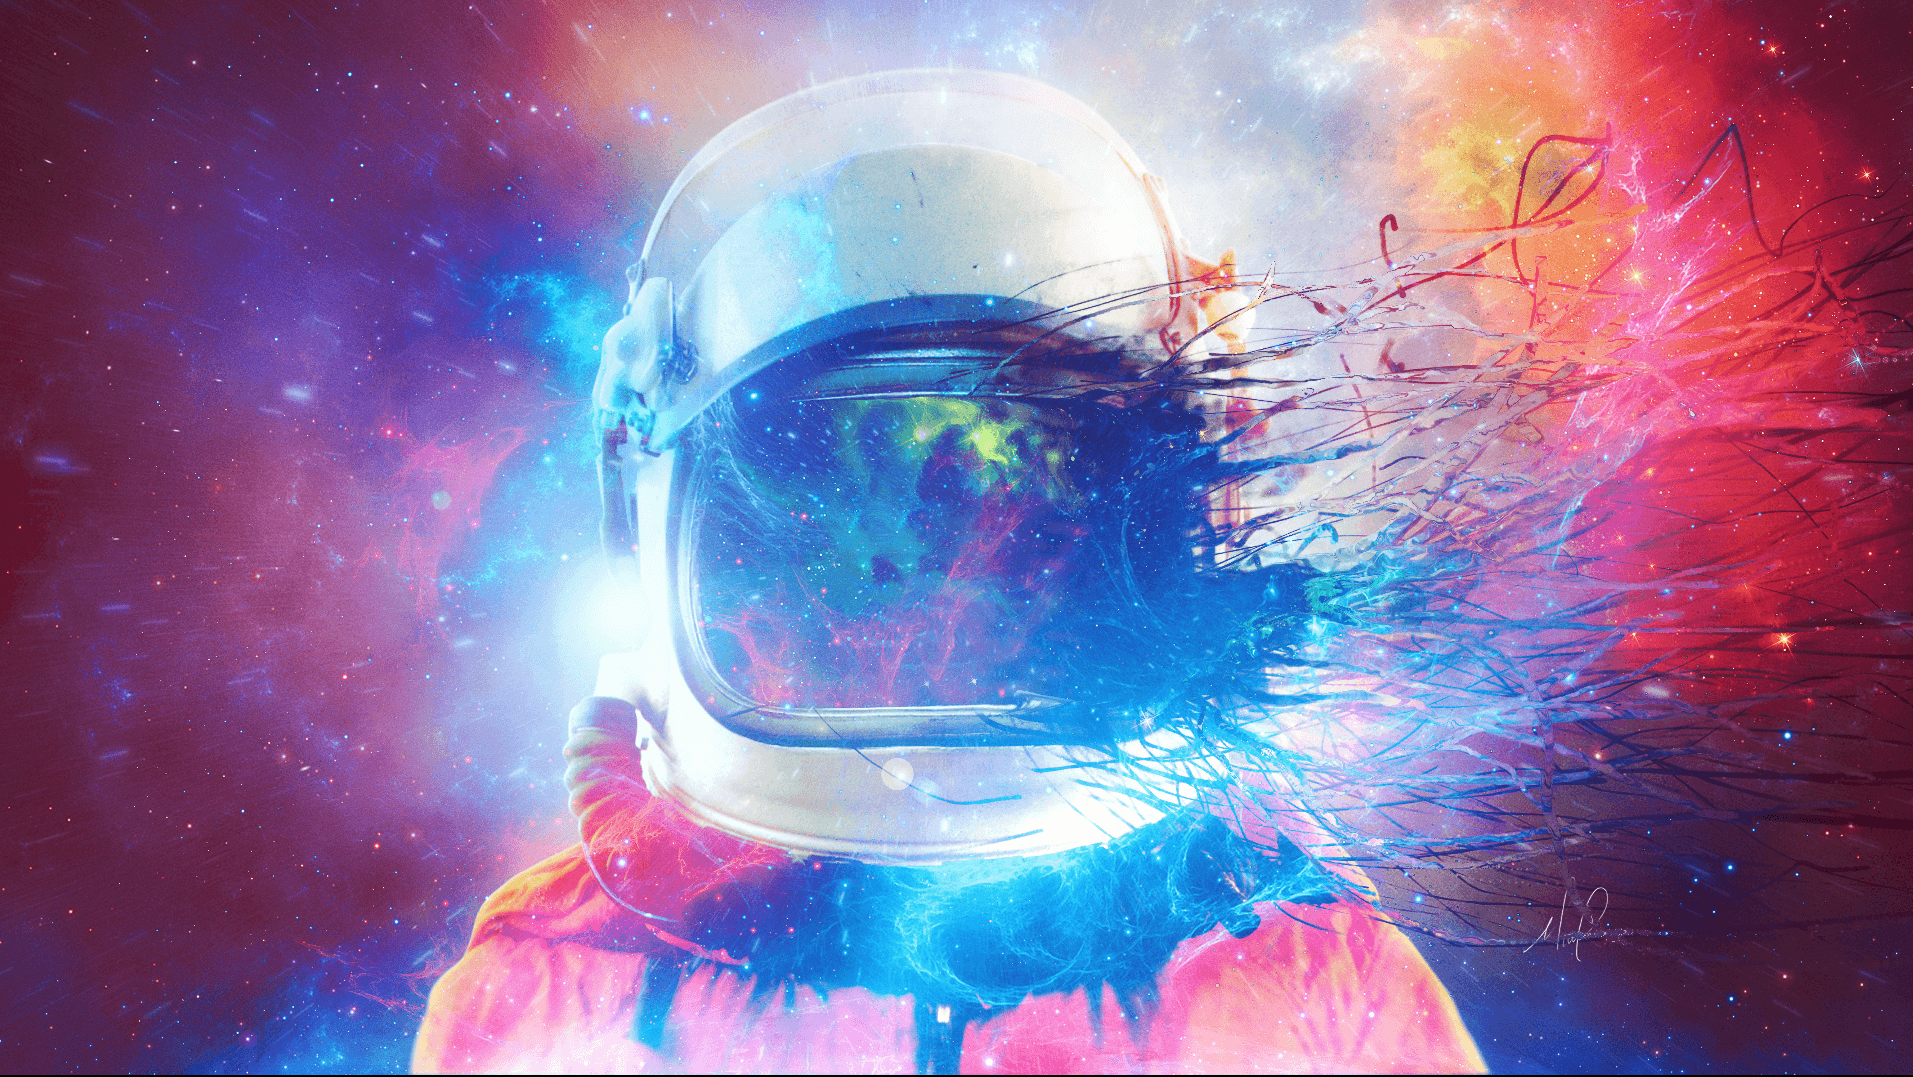 Fading Astronaut [Wallpaper Engine link in comments]